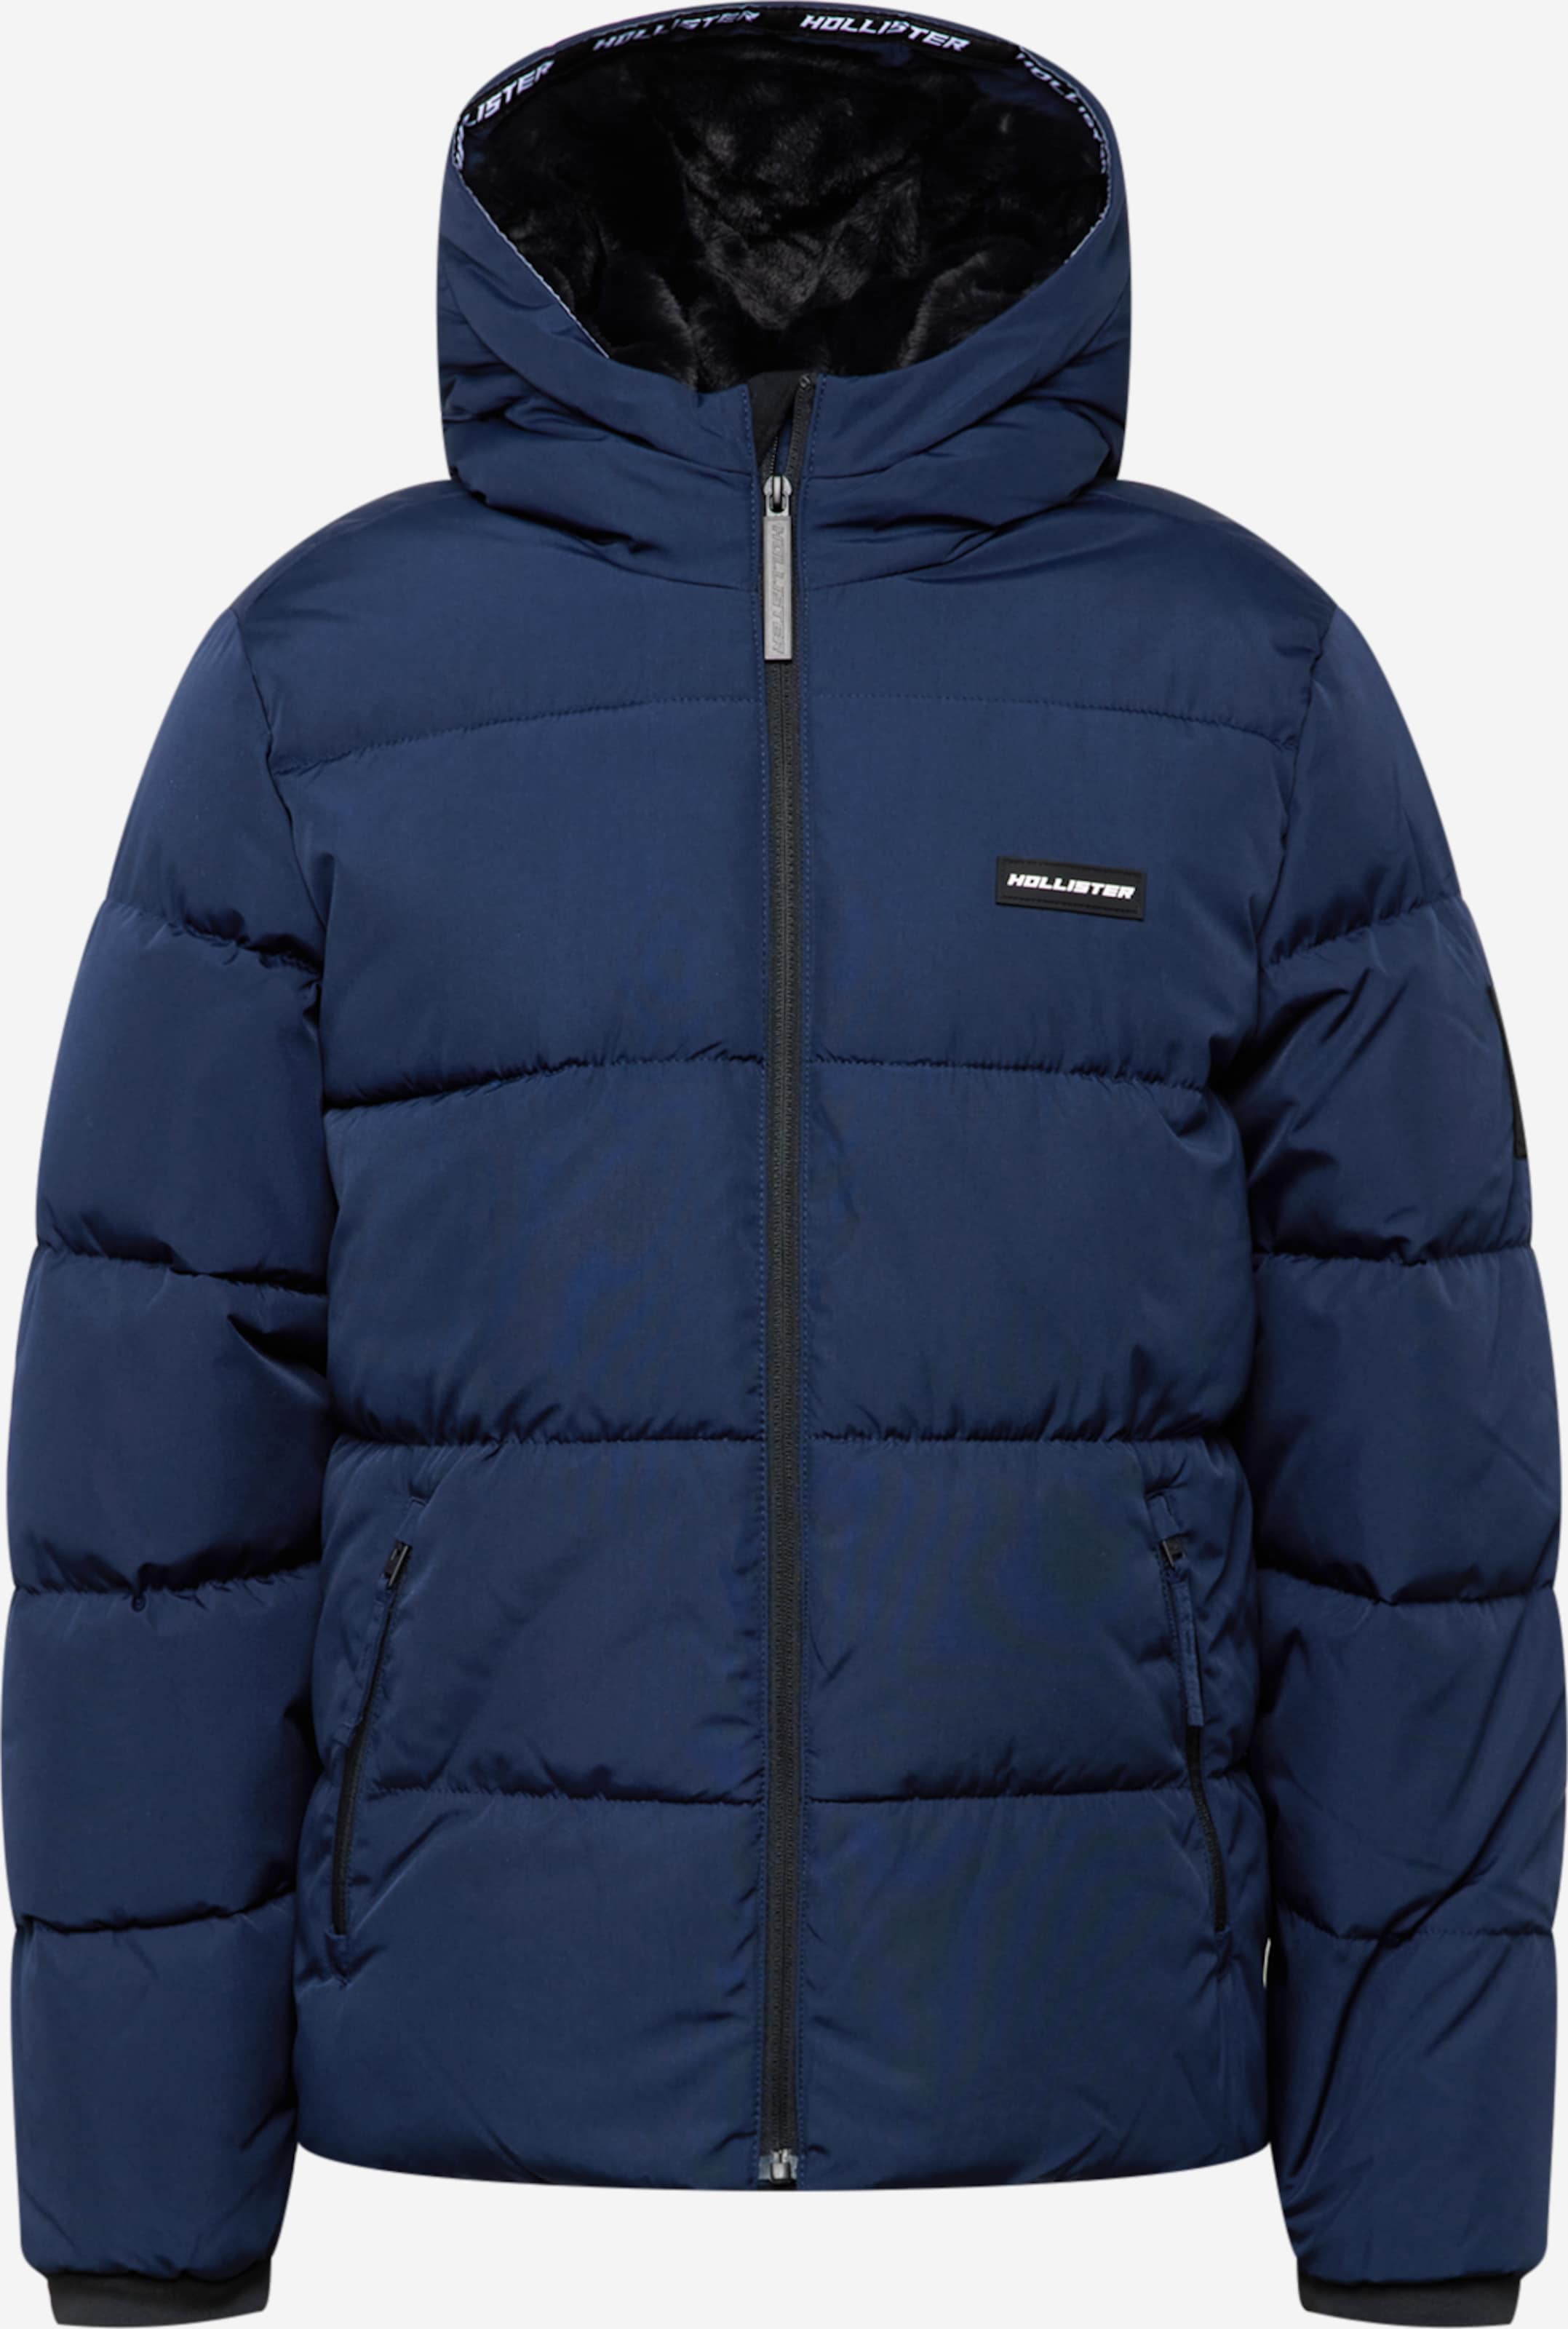 hollister jacket with hood - OFF-66% >Free Delivery